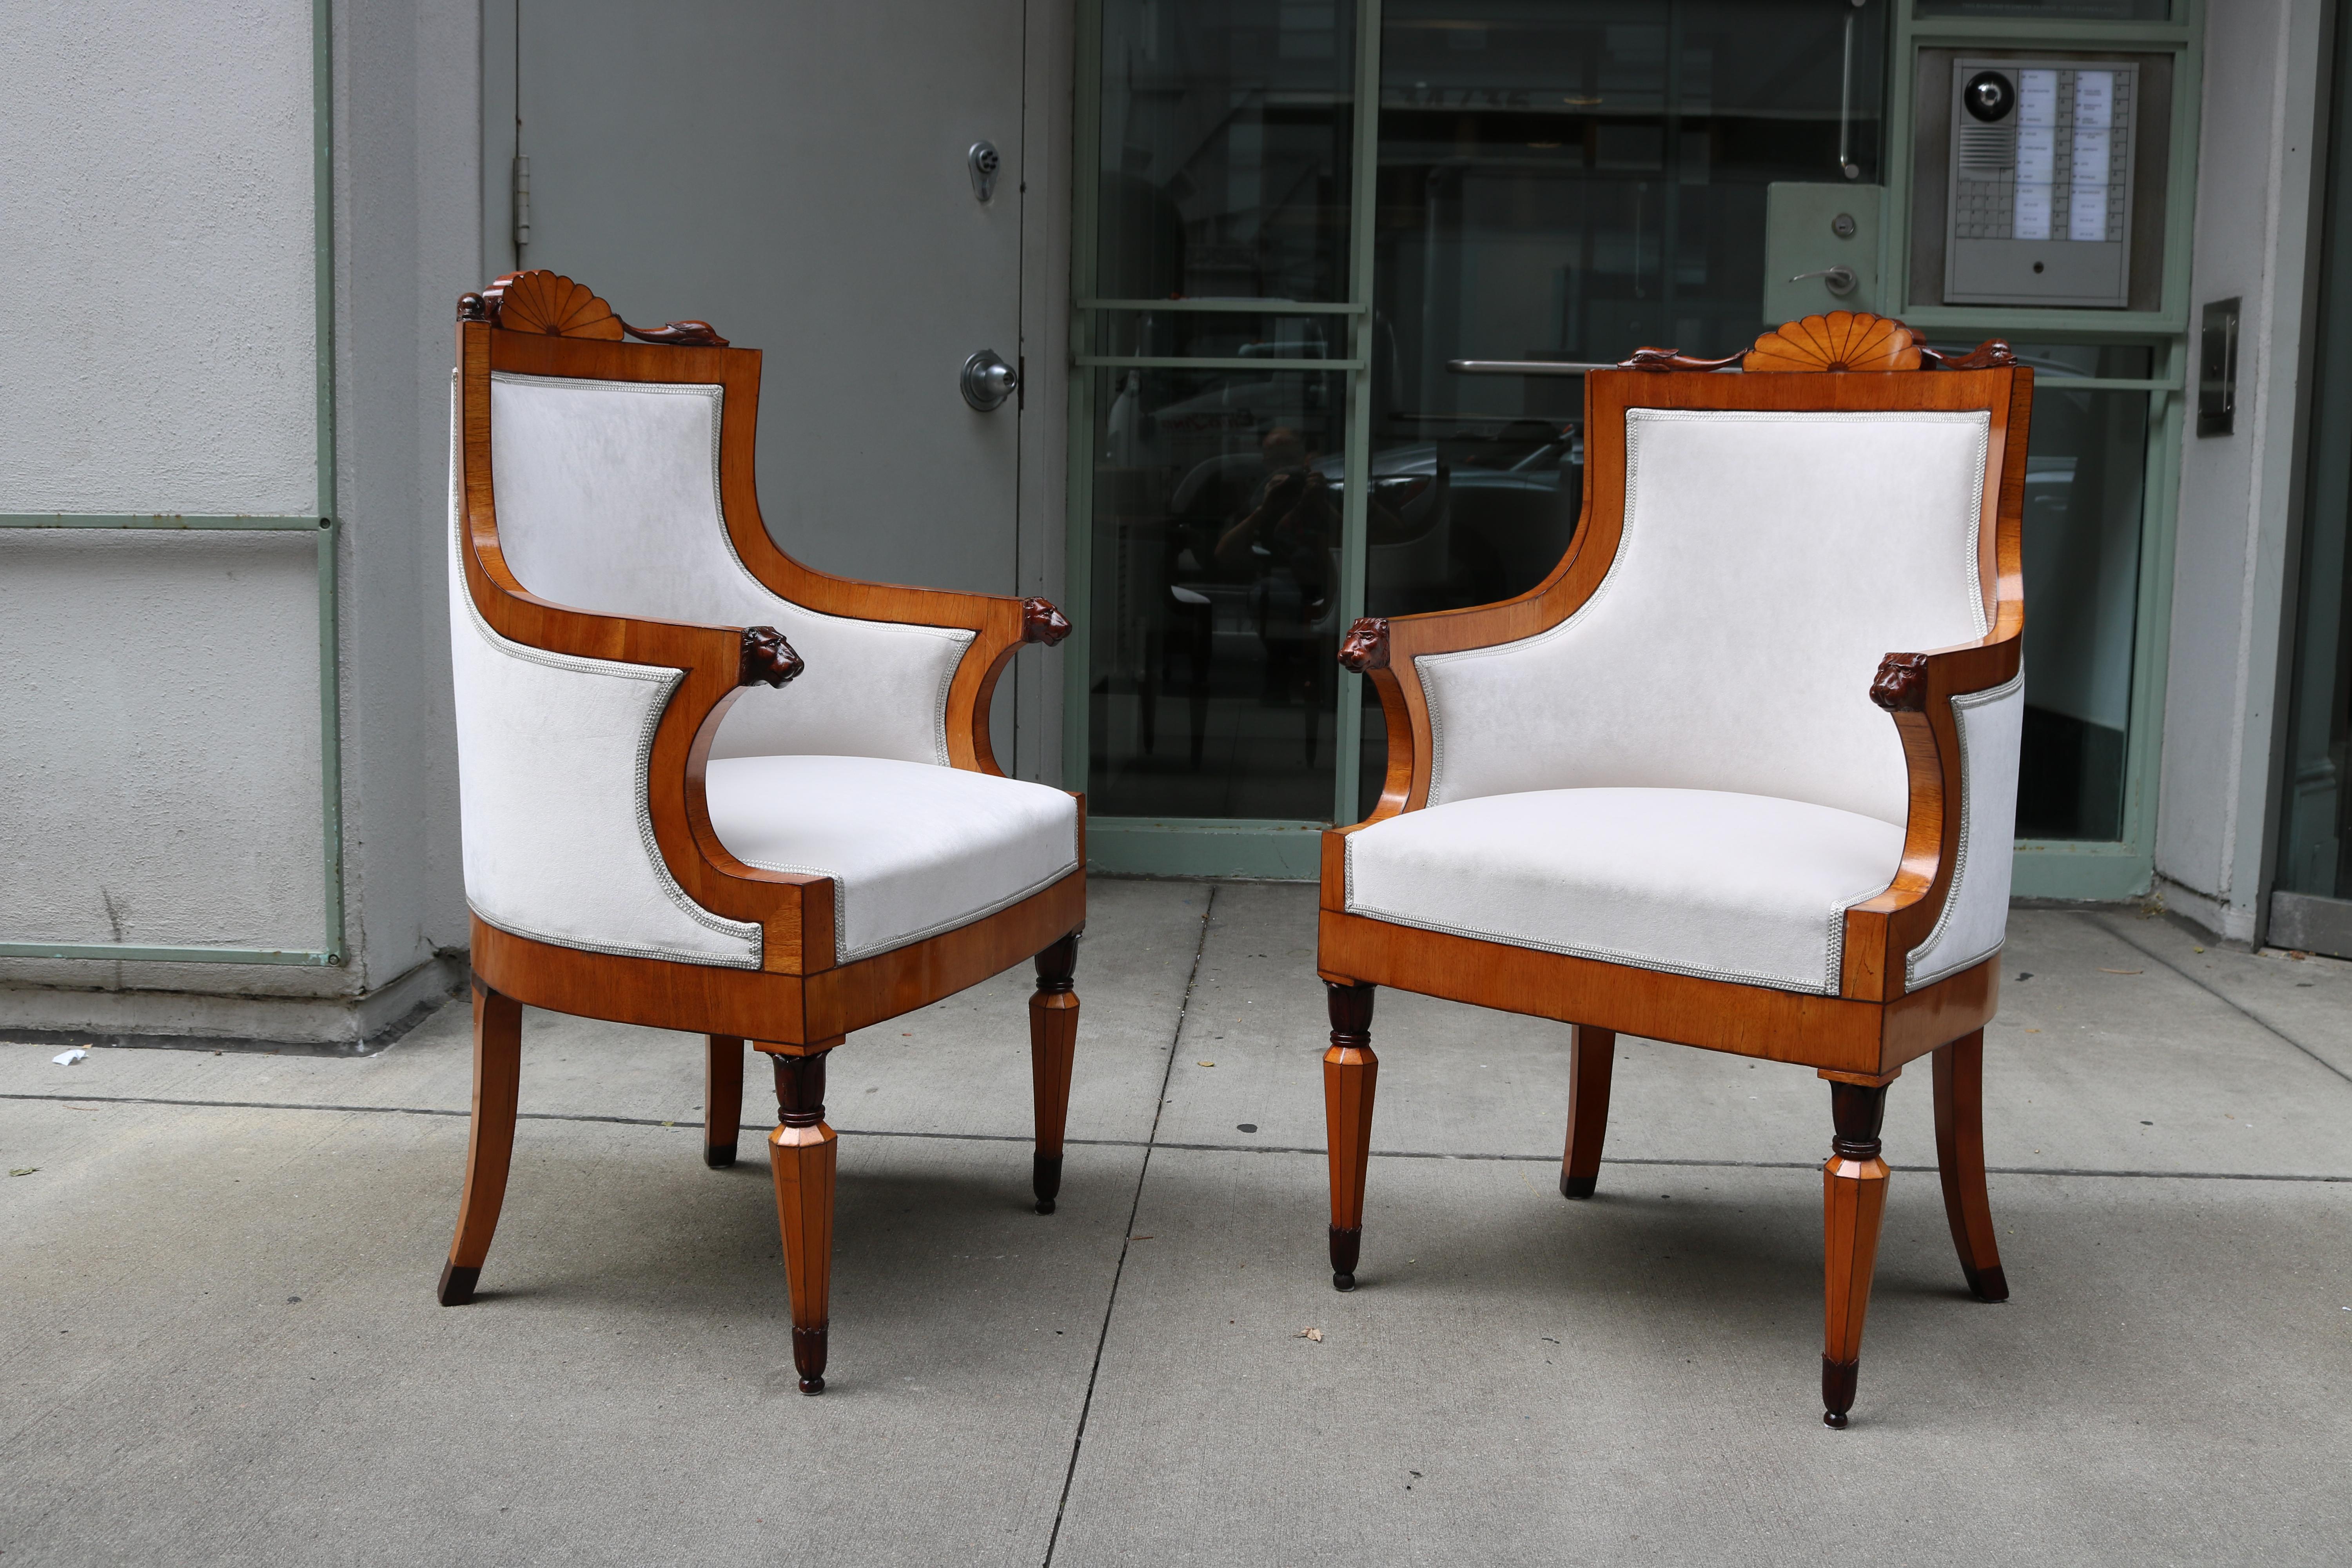 This exquisite pair of armchairs features high, rounded backrests and C-shaped armrests. They stand on octagonal legs with leaf capitals and bases as well as sabre legs. The intricate carved ornamentation includes lion heads on the armrests and